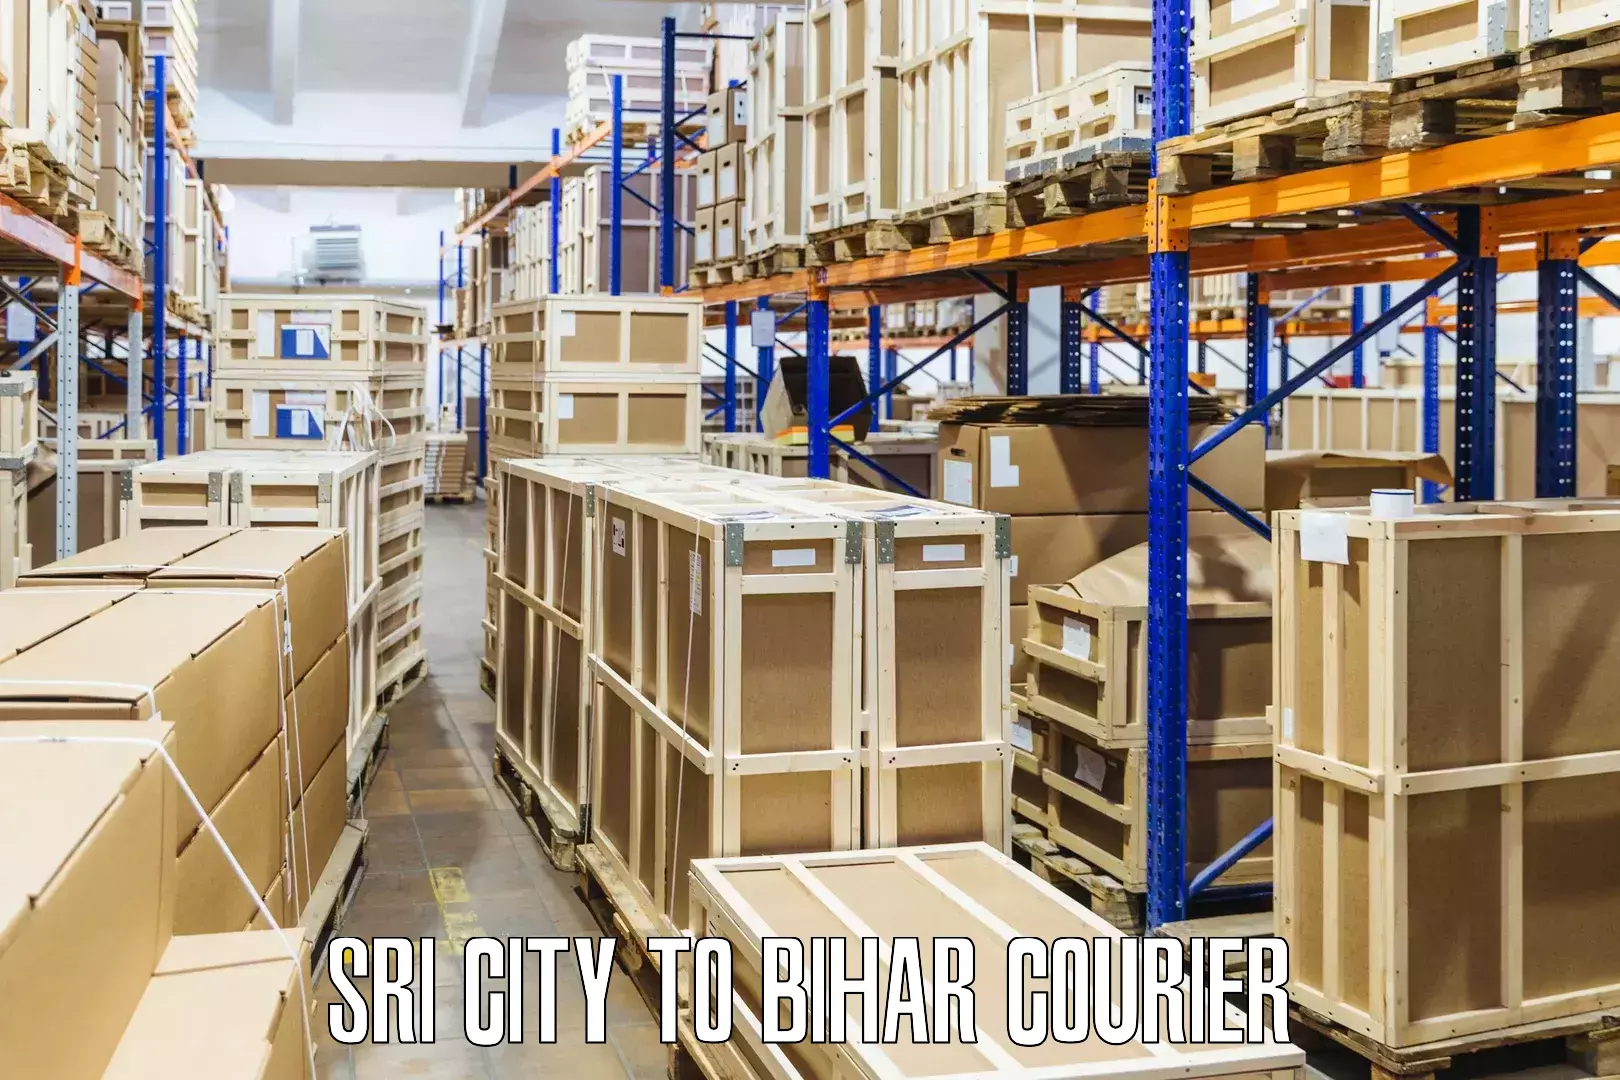 Express package services Sri City to Bihar